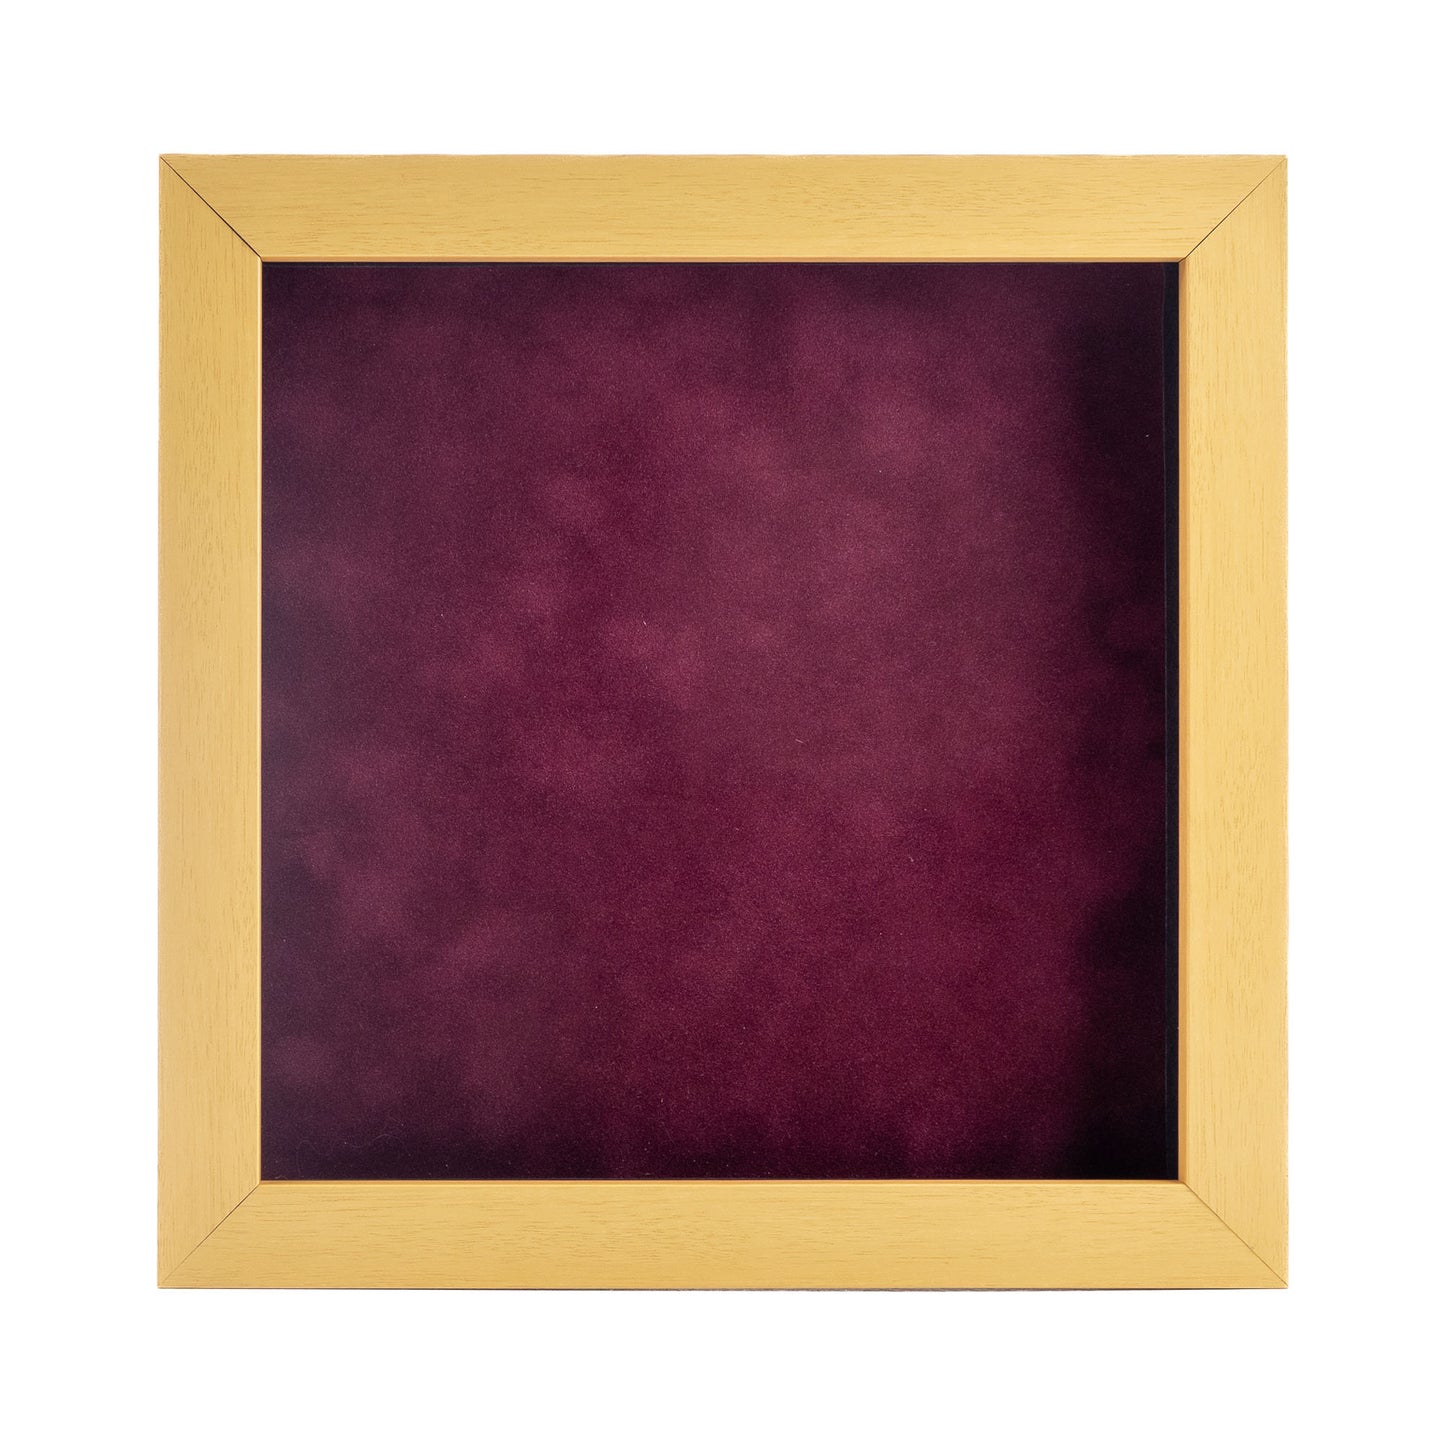 Natural Shadow Box Frame With Dark Berry Acid-Free Suede Backing